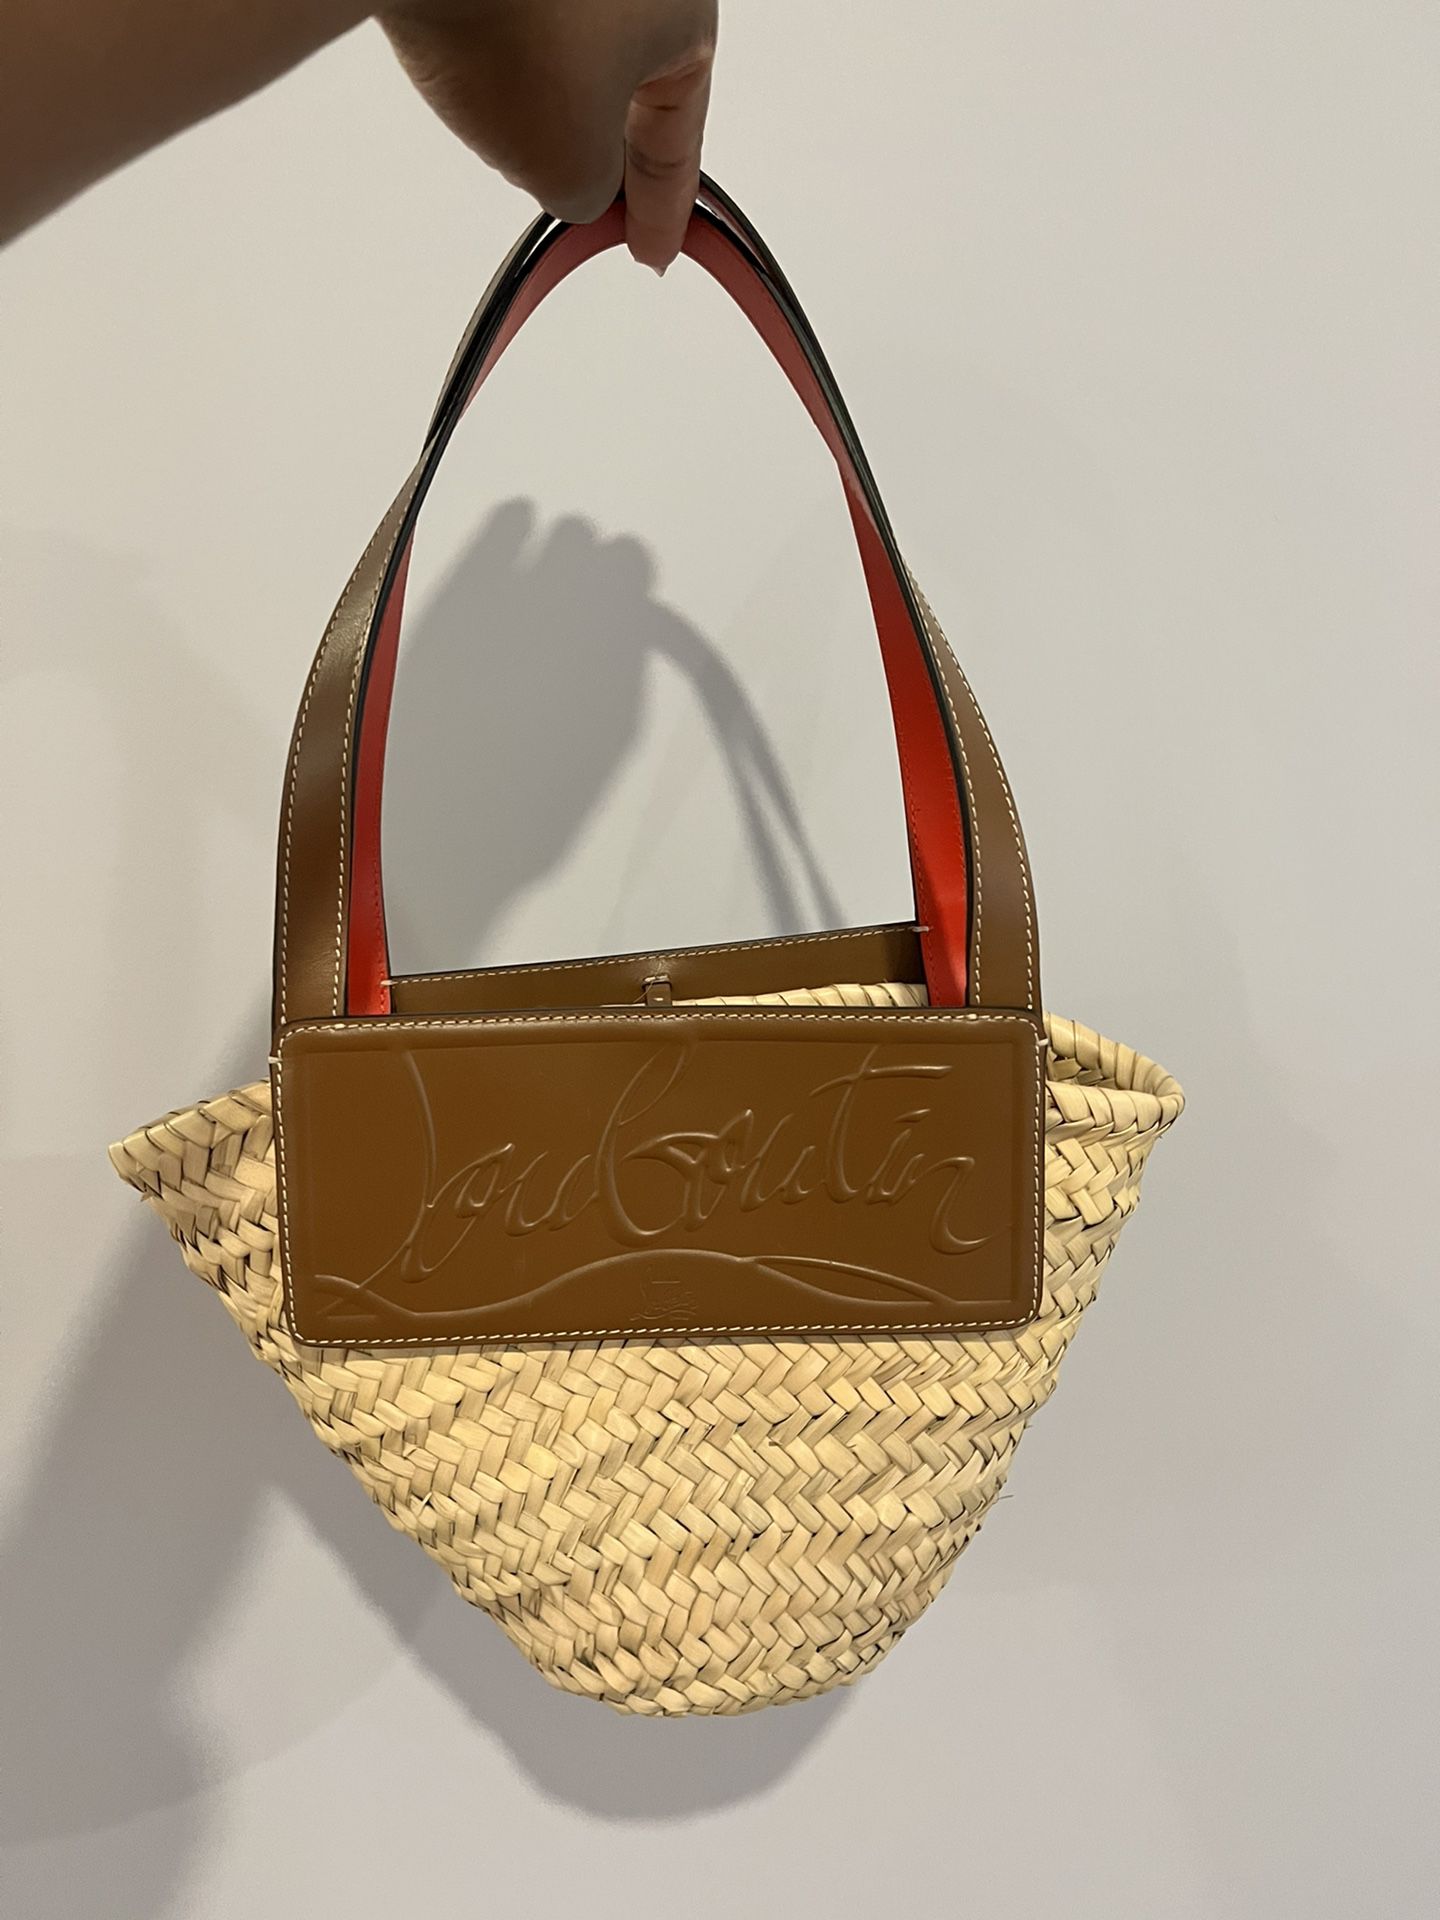 Brand New Louboutin Purse With All Original Packaging 